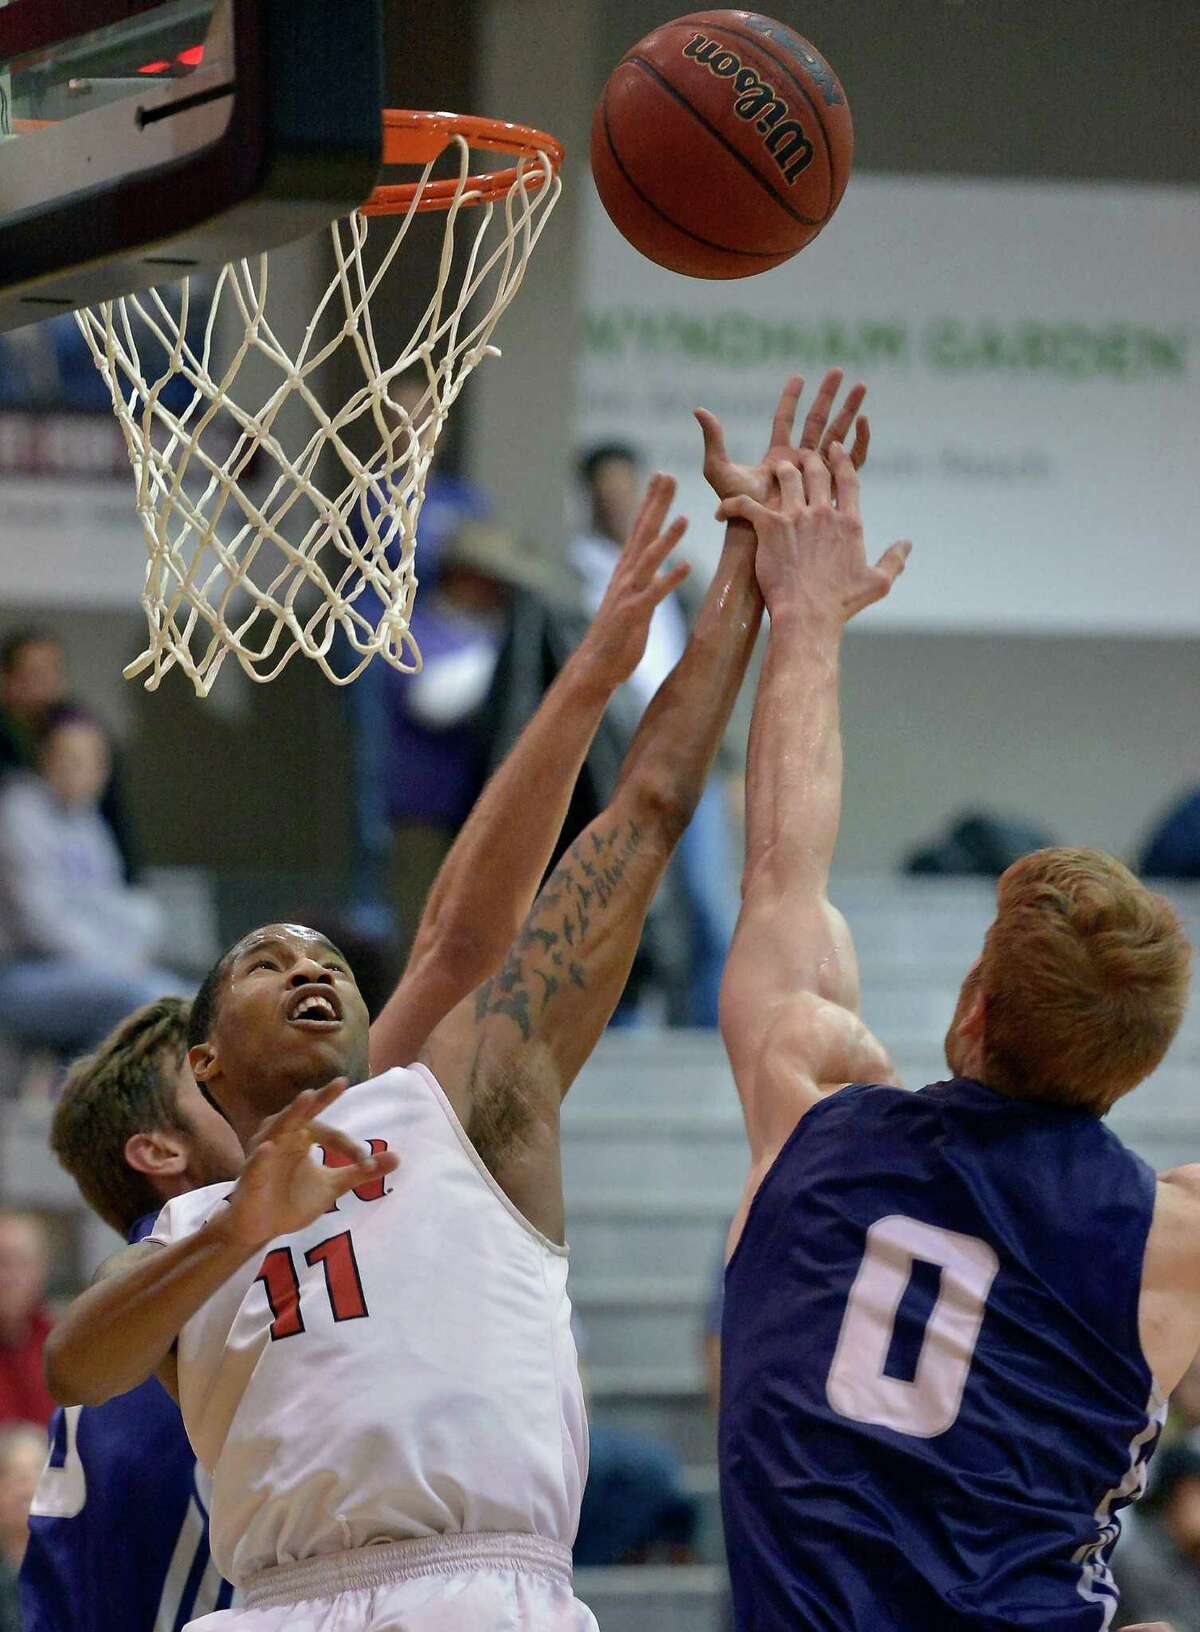 Incarnate Word's Denzel Livingston, left, shoots against Stephen F. Austin's Thomas Walkup during a college basketball game, Monday, Feb. 16, 2015, at the University of the Incarnate Word in San Antonio. Stephen F. Austin won 90-76. (Darren Abate/For the Express-News)